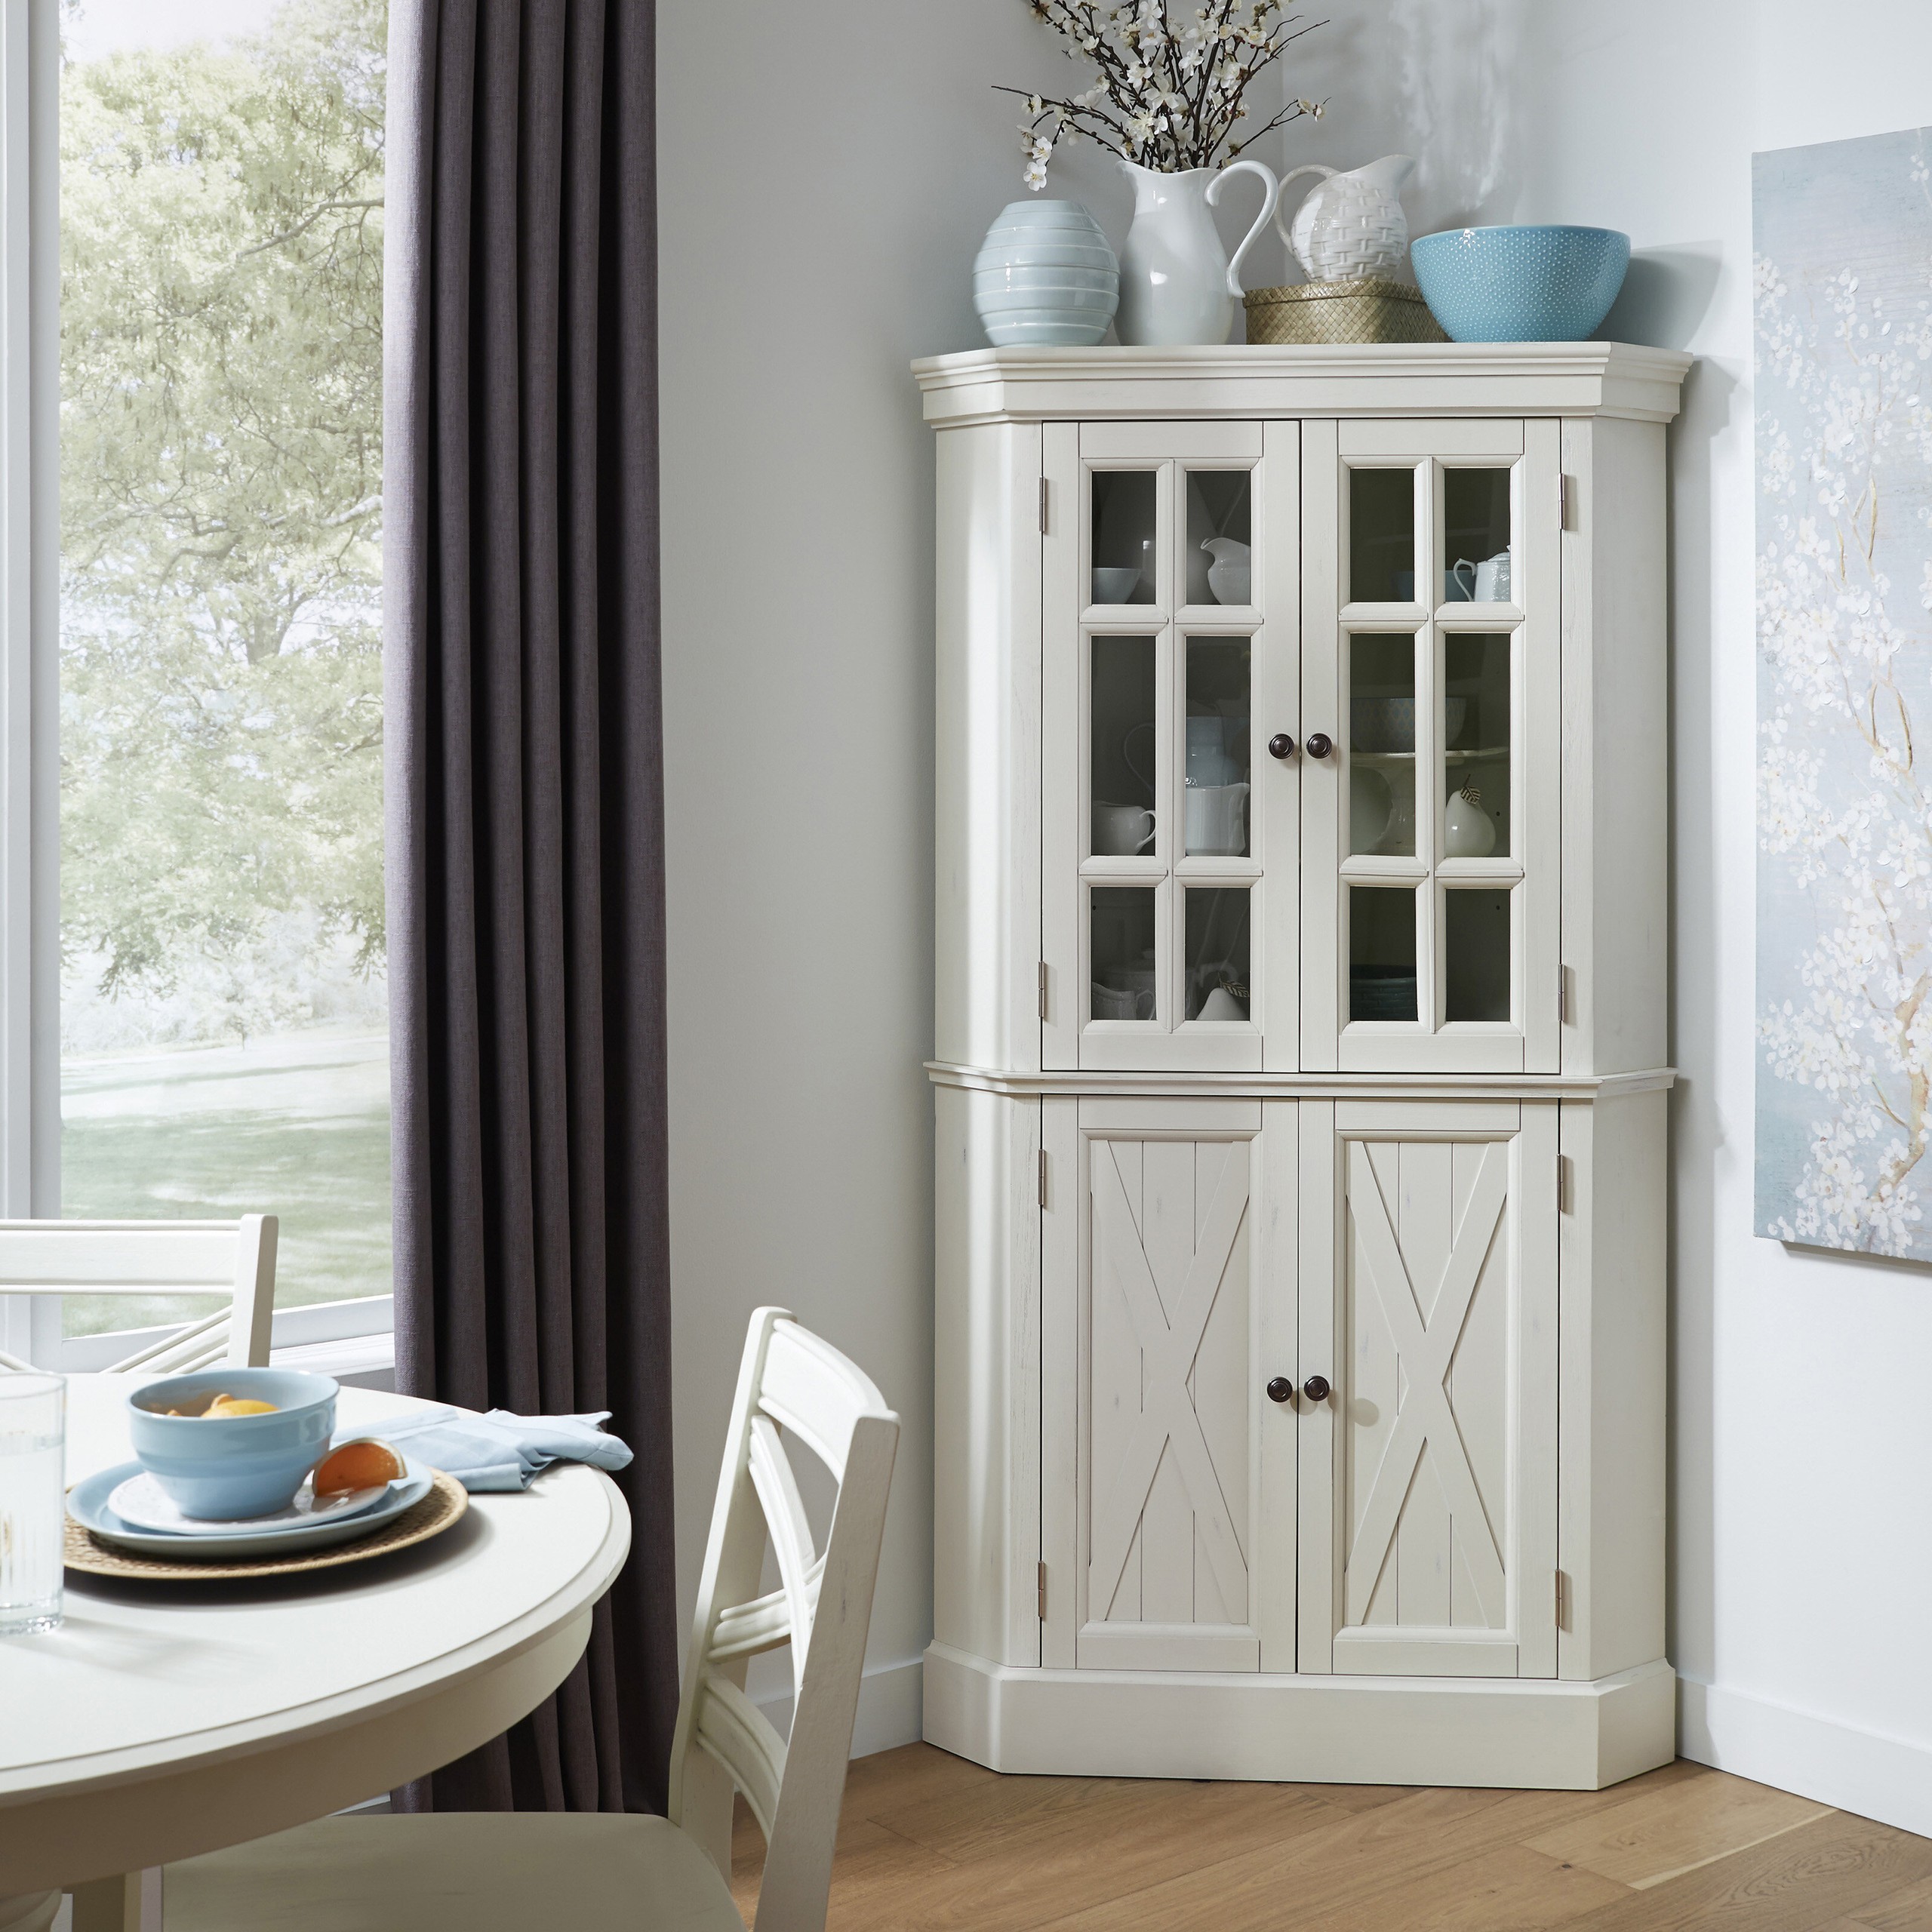 10 Reasons To Spice Up Your Kitchen With A Corner Cabinet - Foter